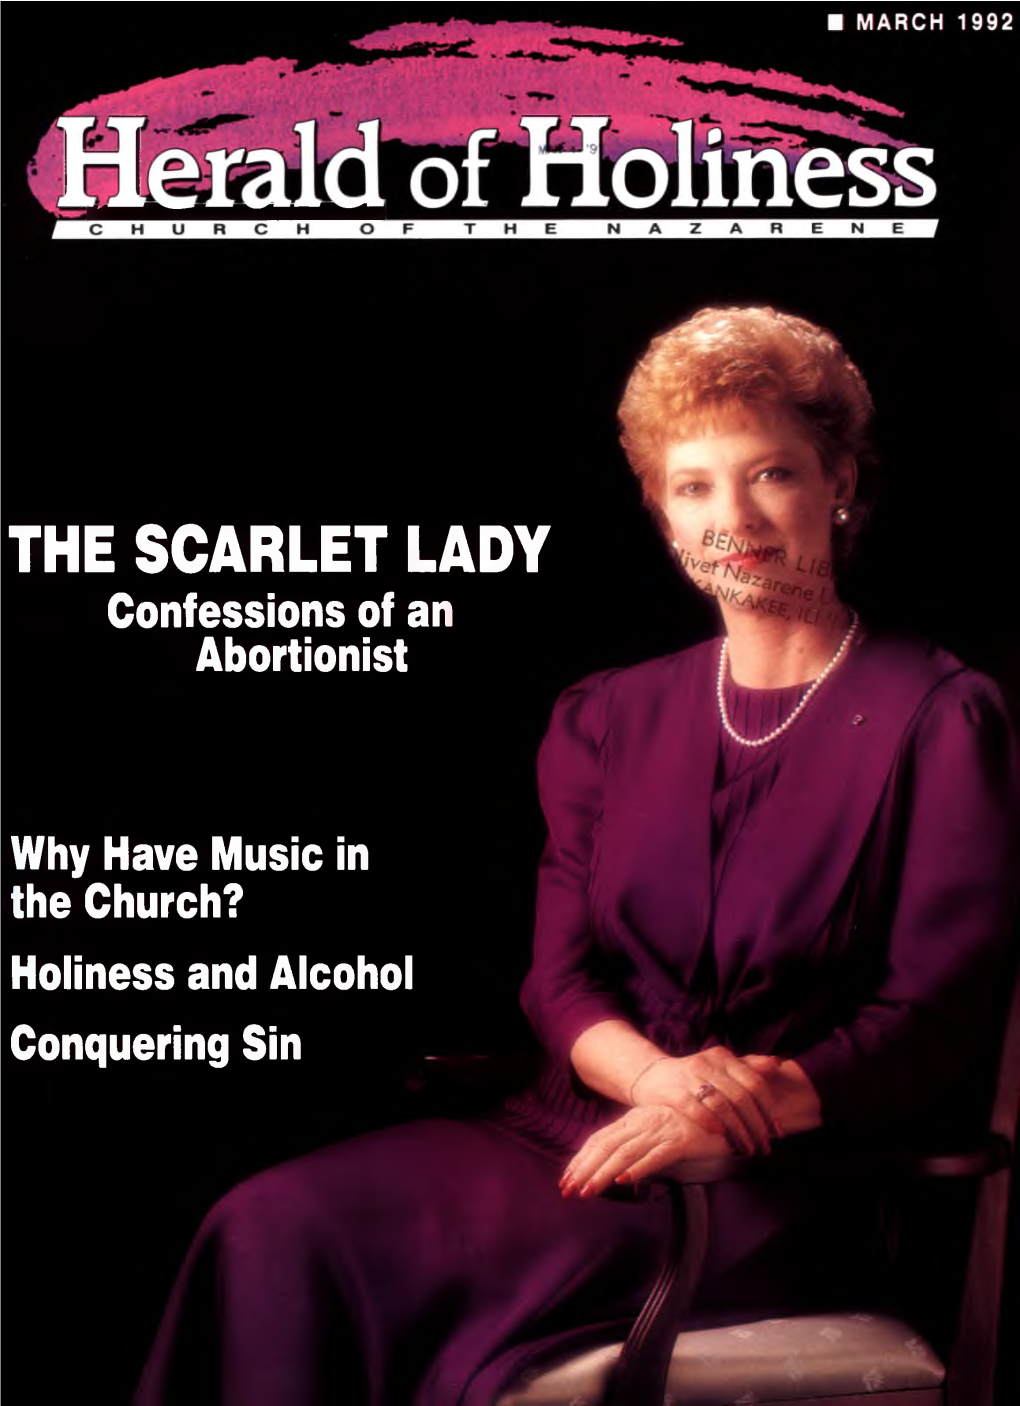 THE SCARLET LADY Confessions of an Abortionist